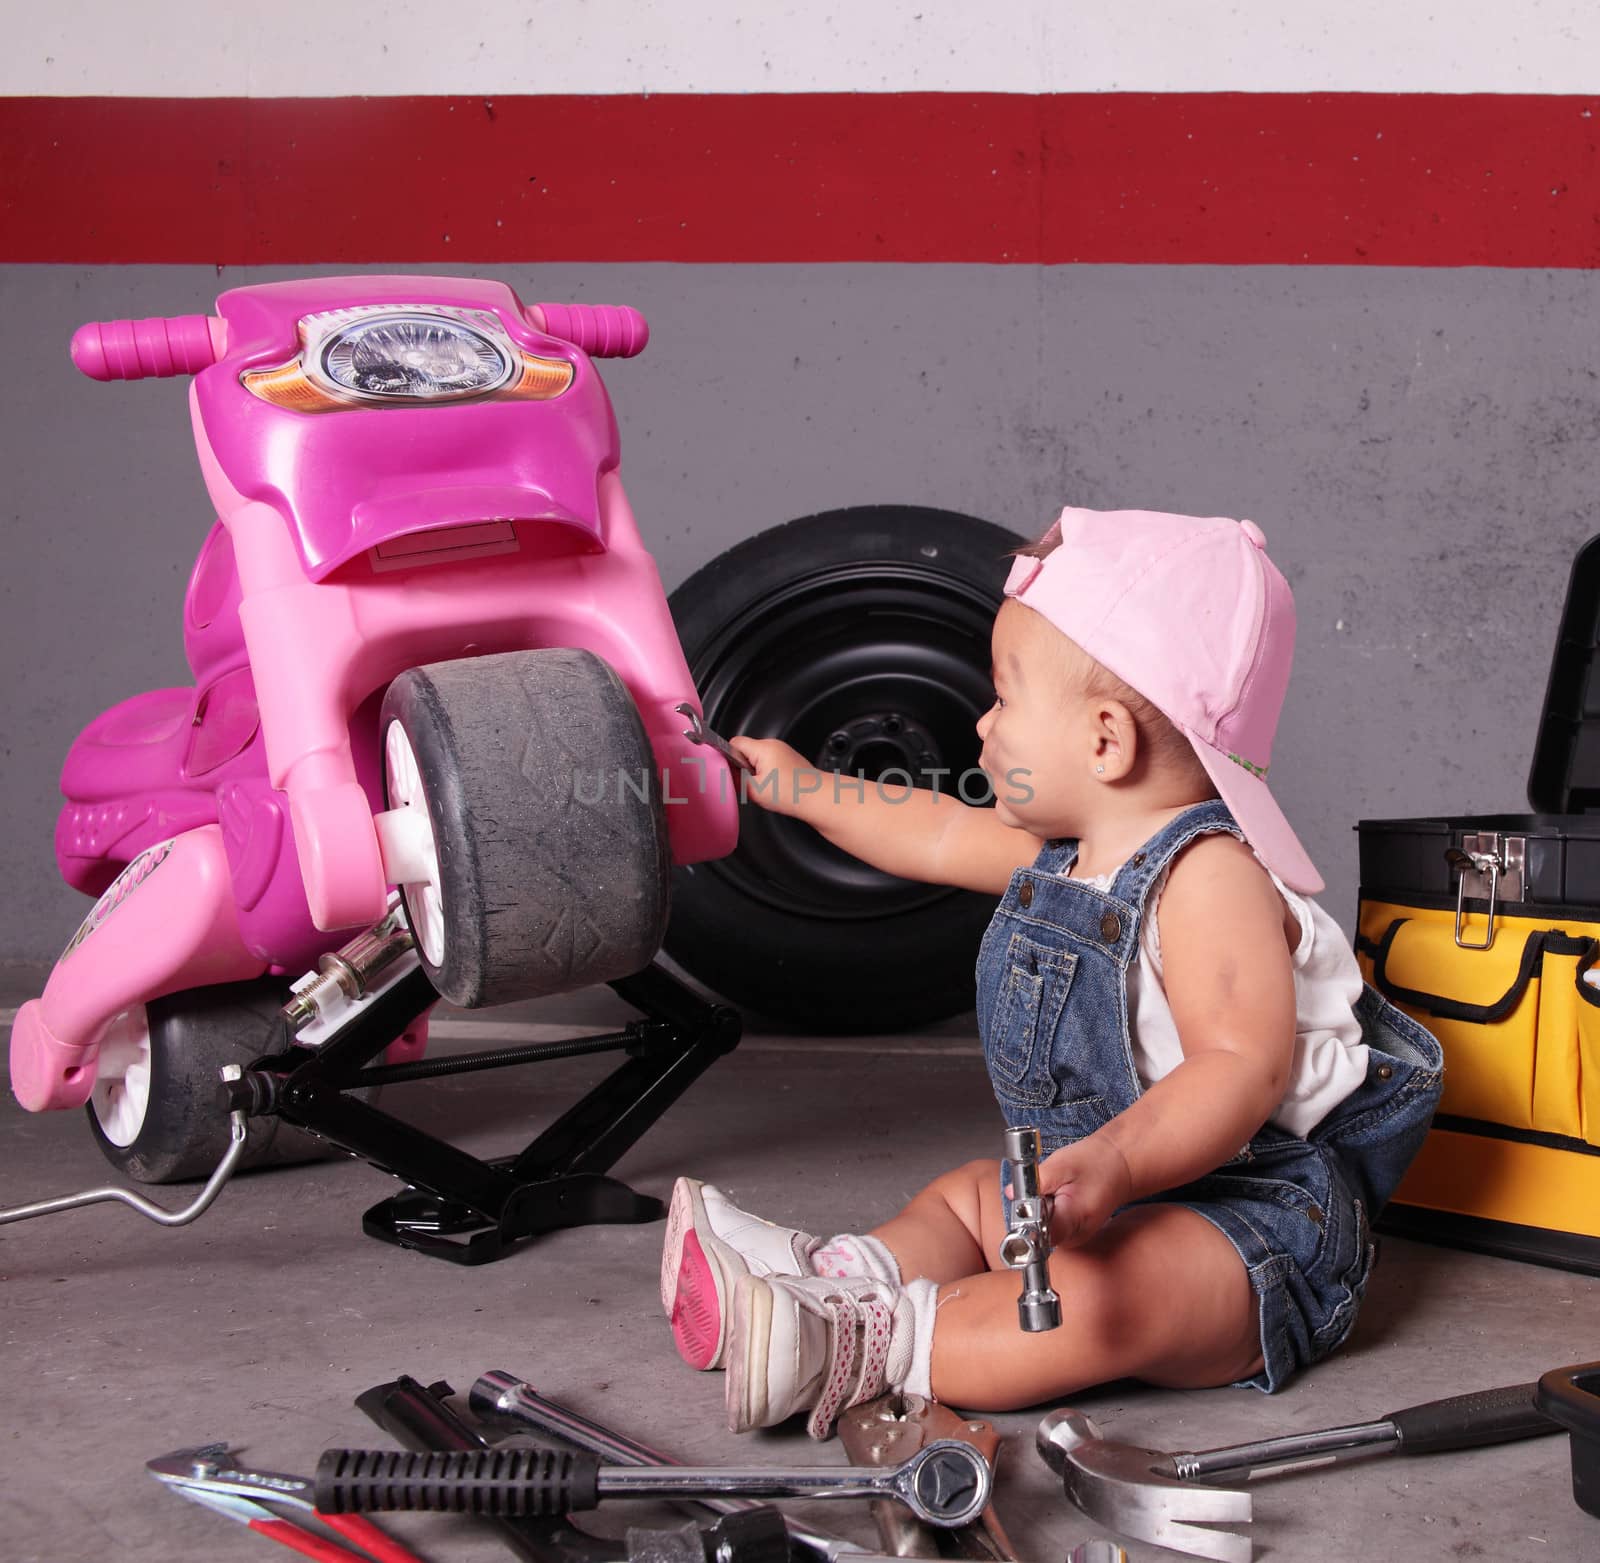 young mechanic by erllre